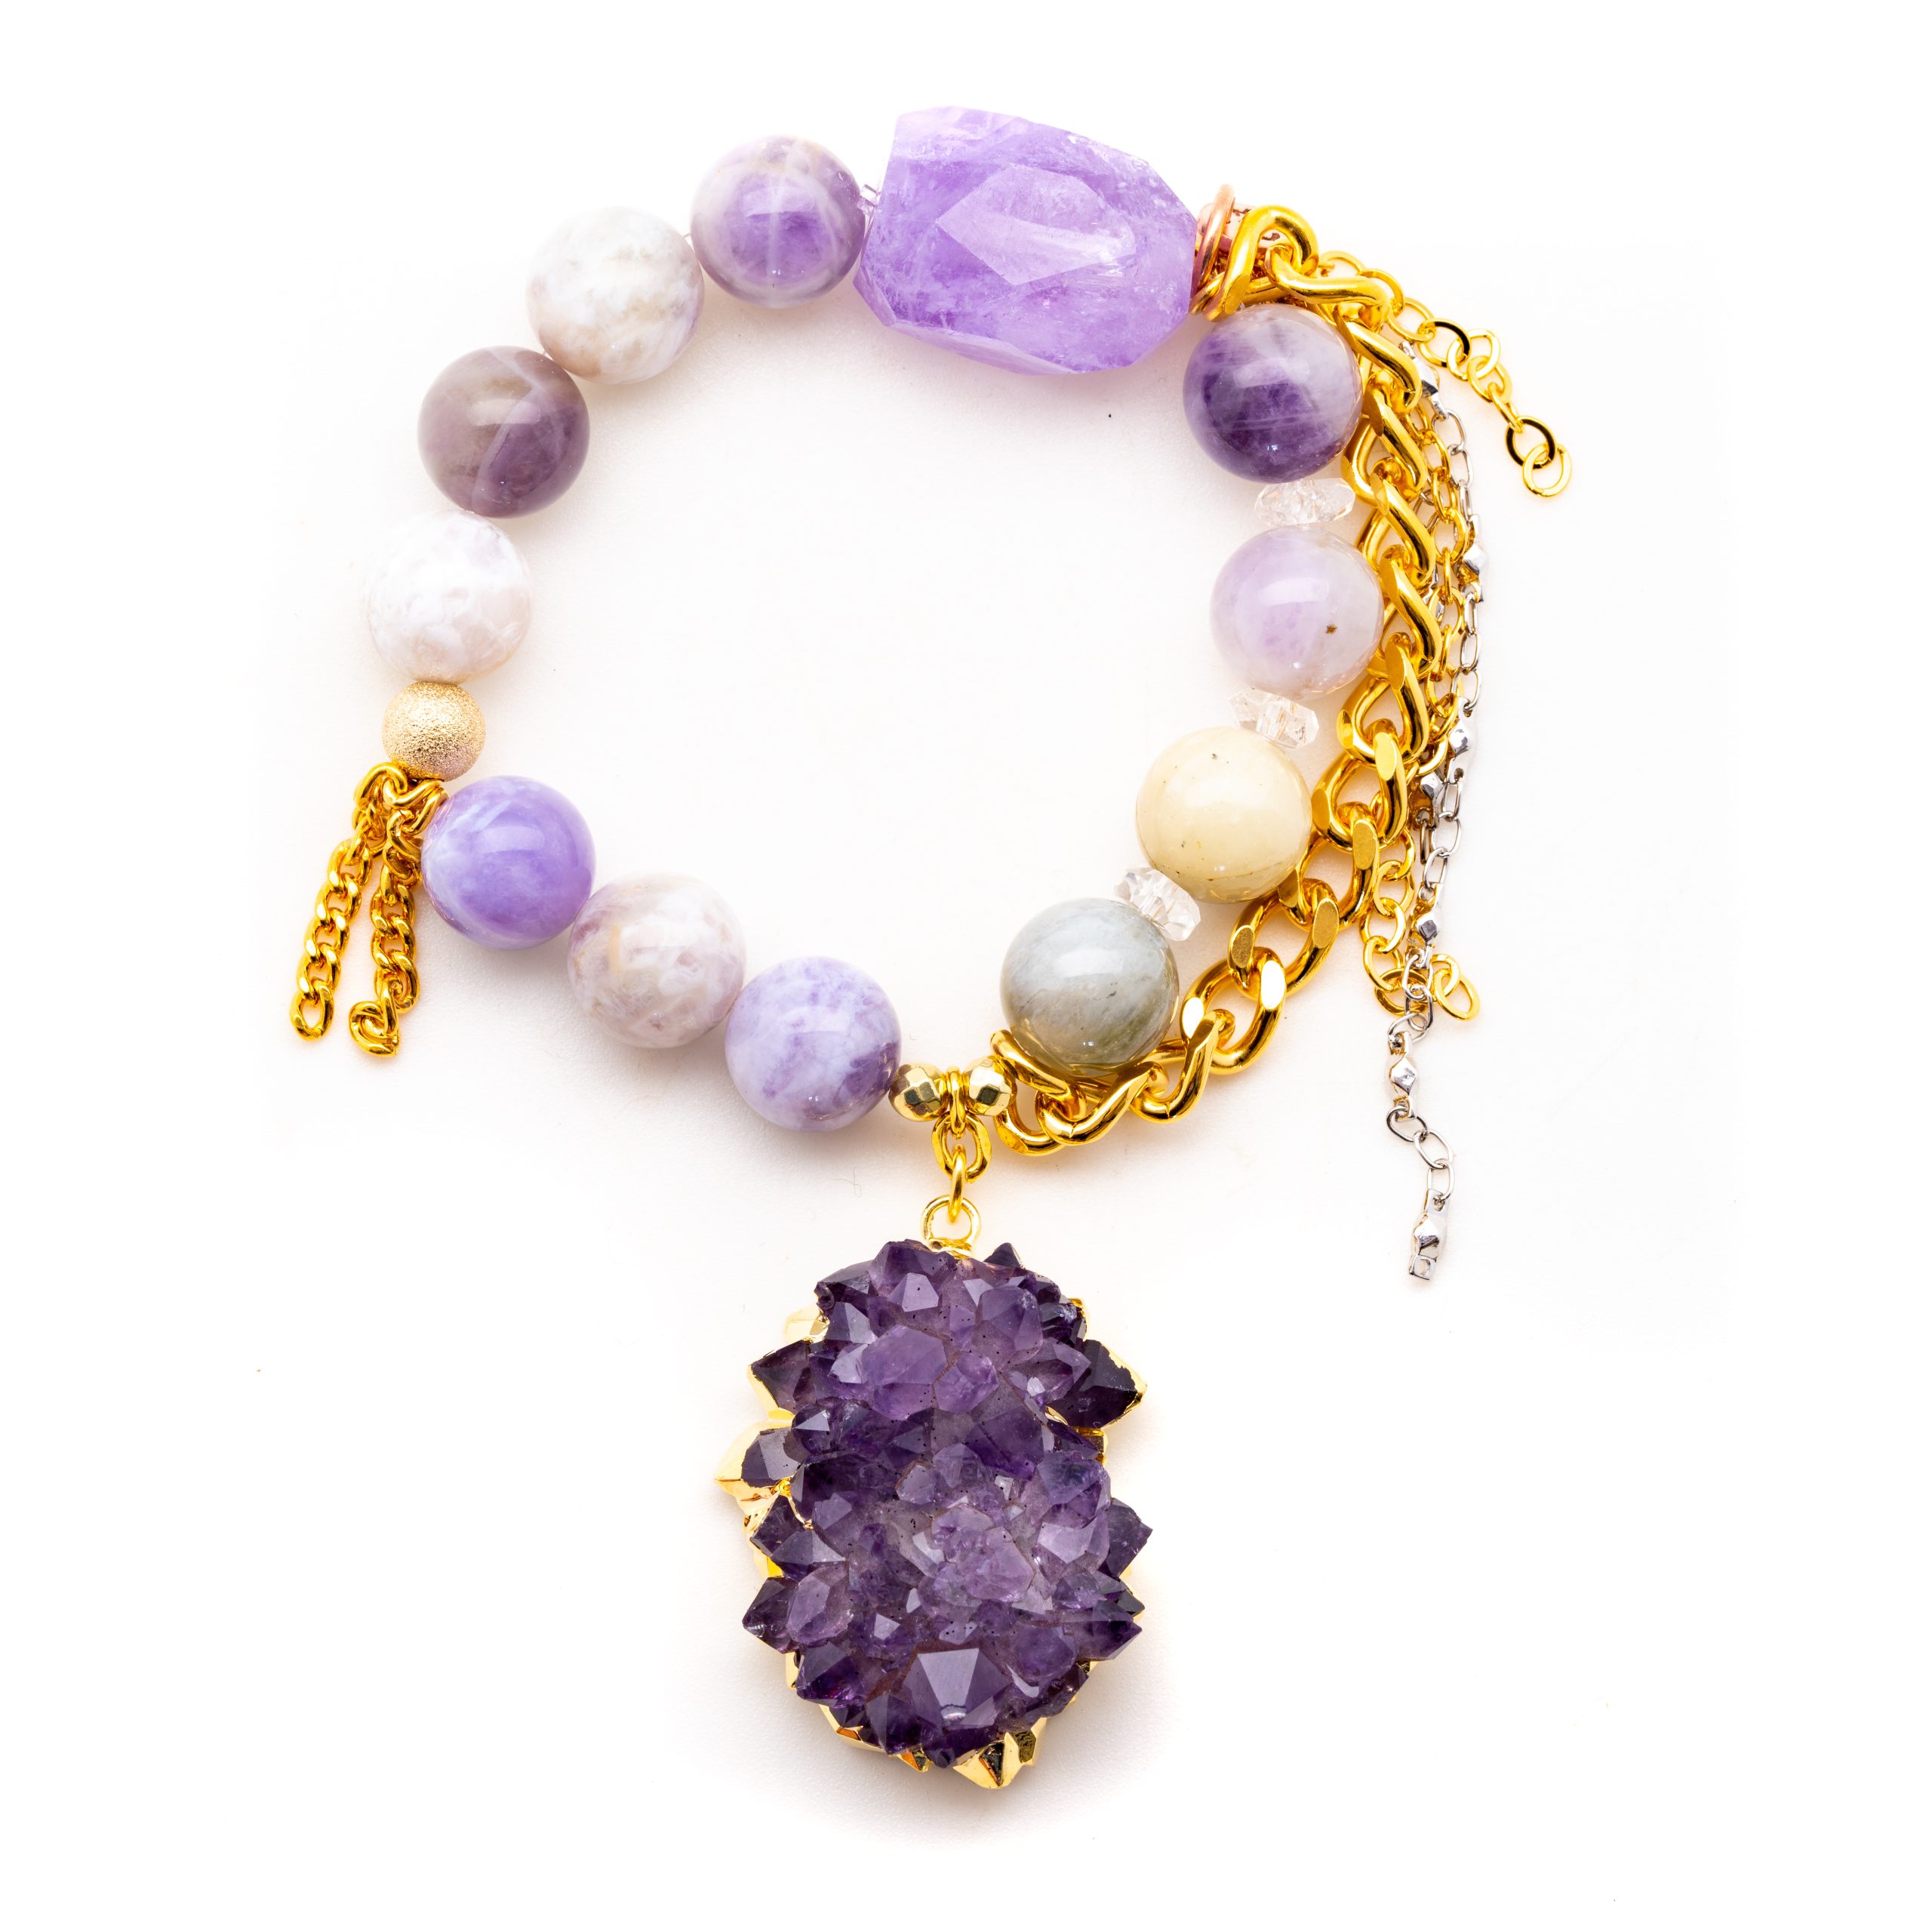 Lavender Opals with an Amethyst Flower